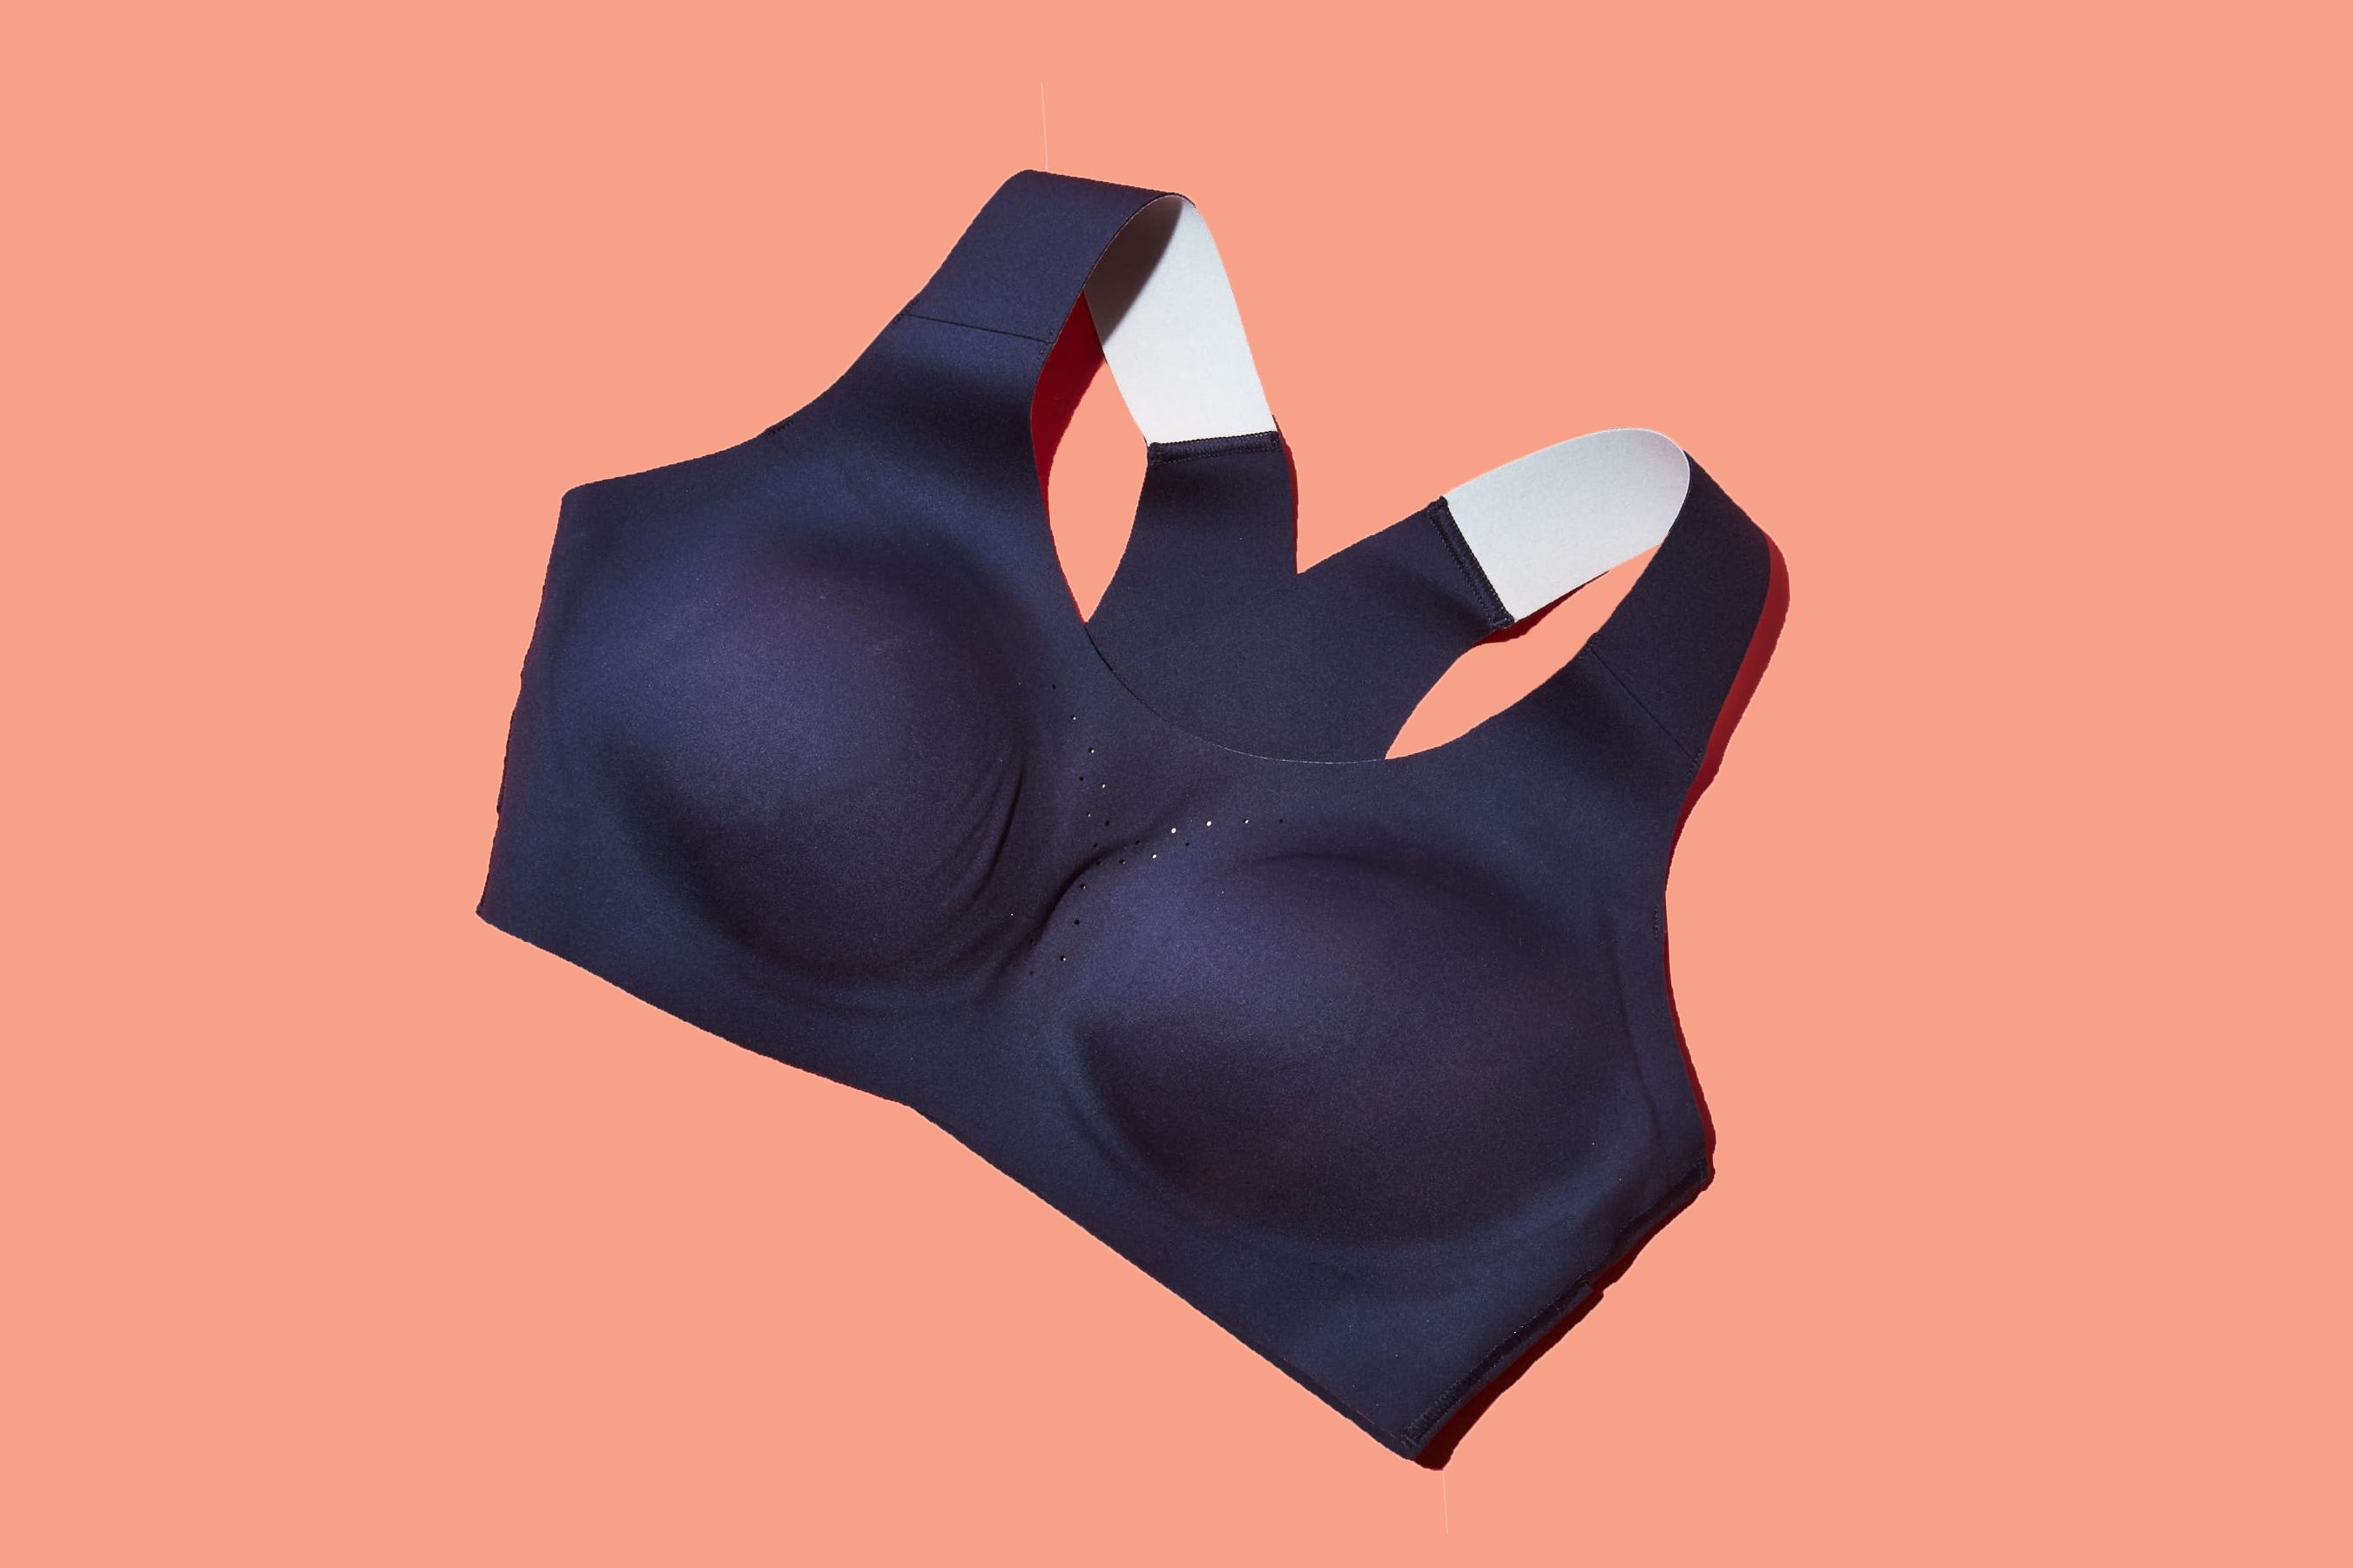 ICONIC SPORT BRA - The world's first bra with proven lifespan